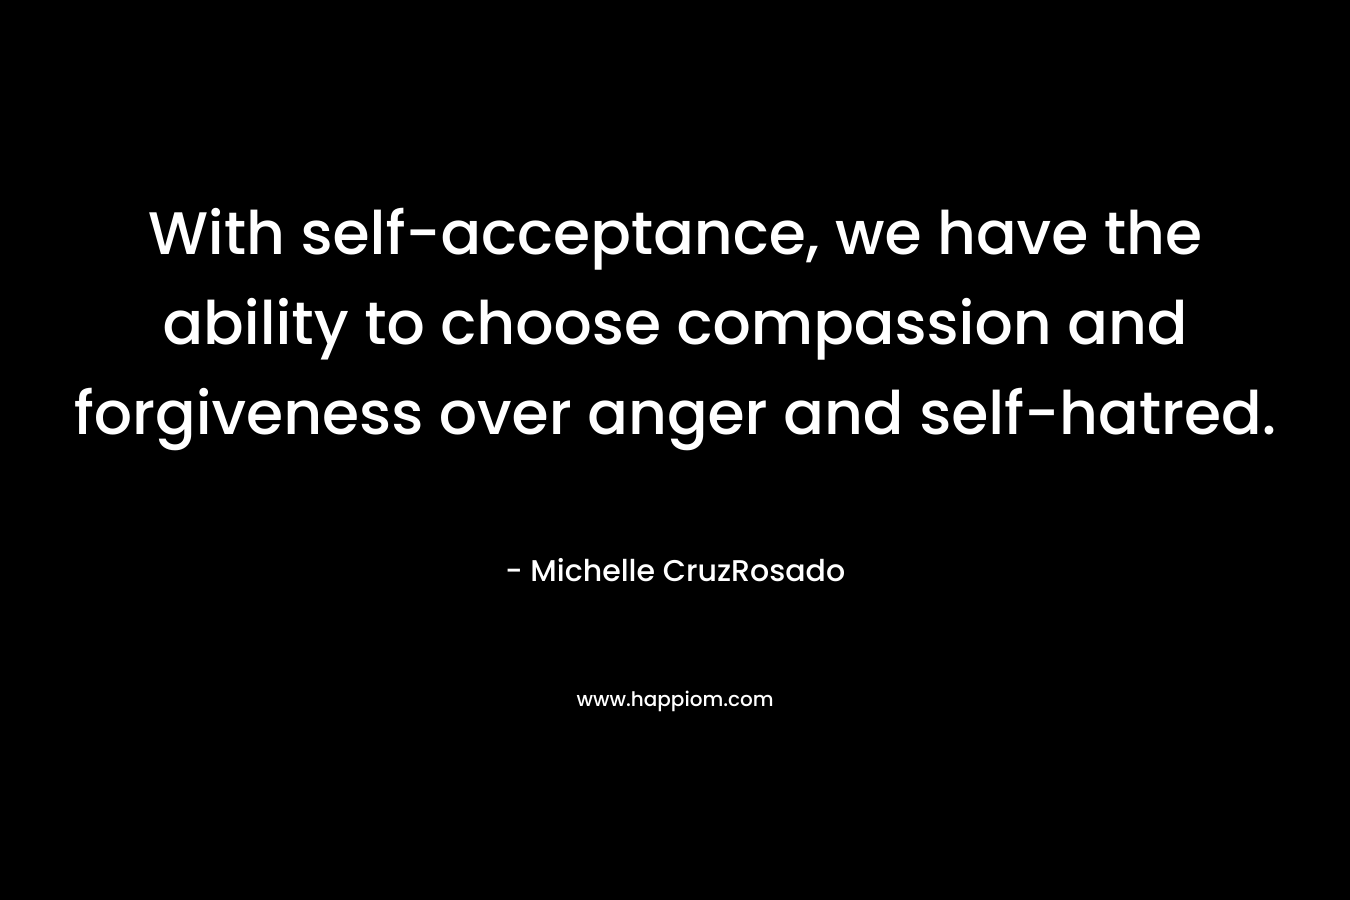 With self-acceptance, we have the ability to choose compassion and forgiveness over anger and self-hatred. – Michelle CruzRosado